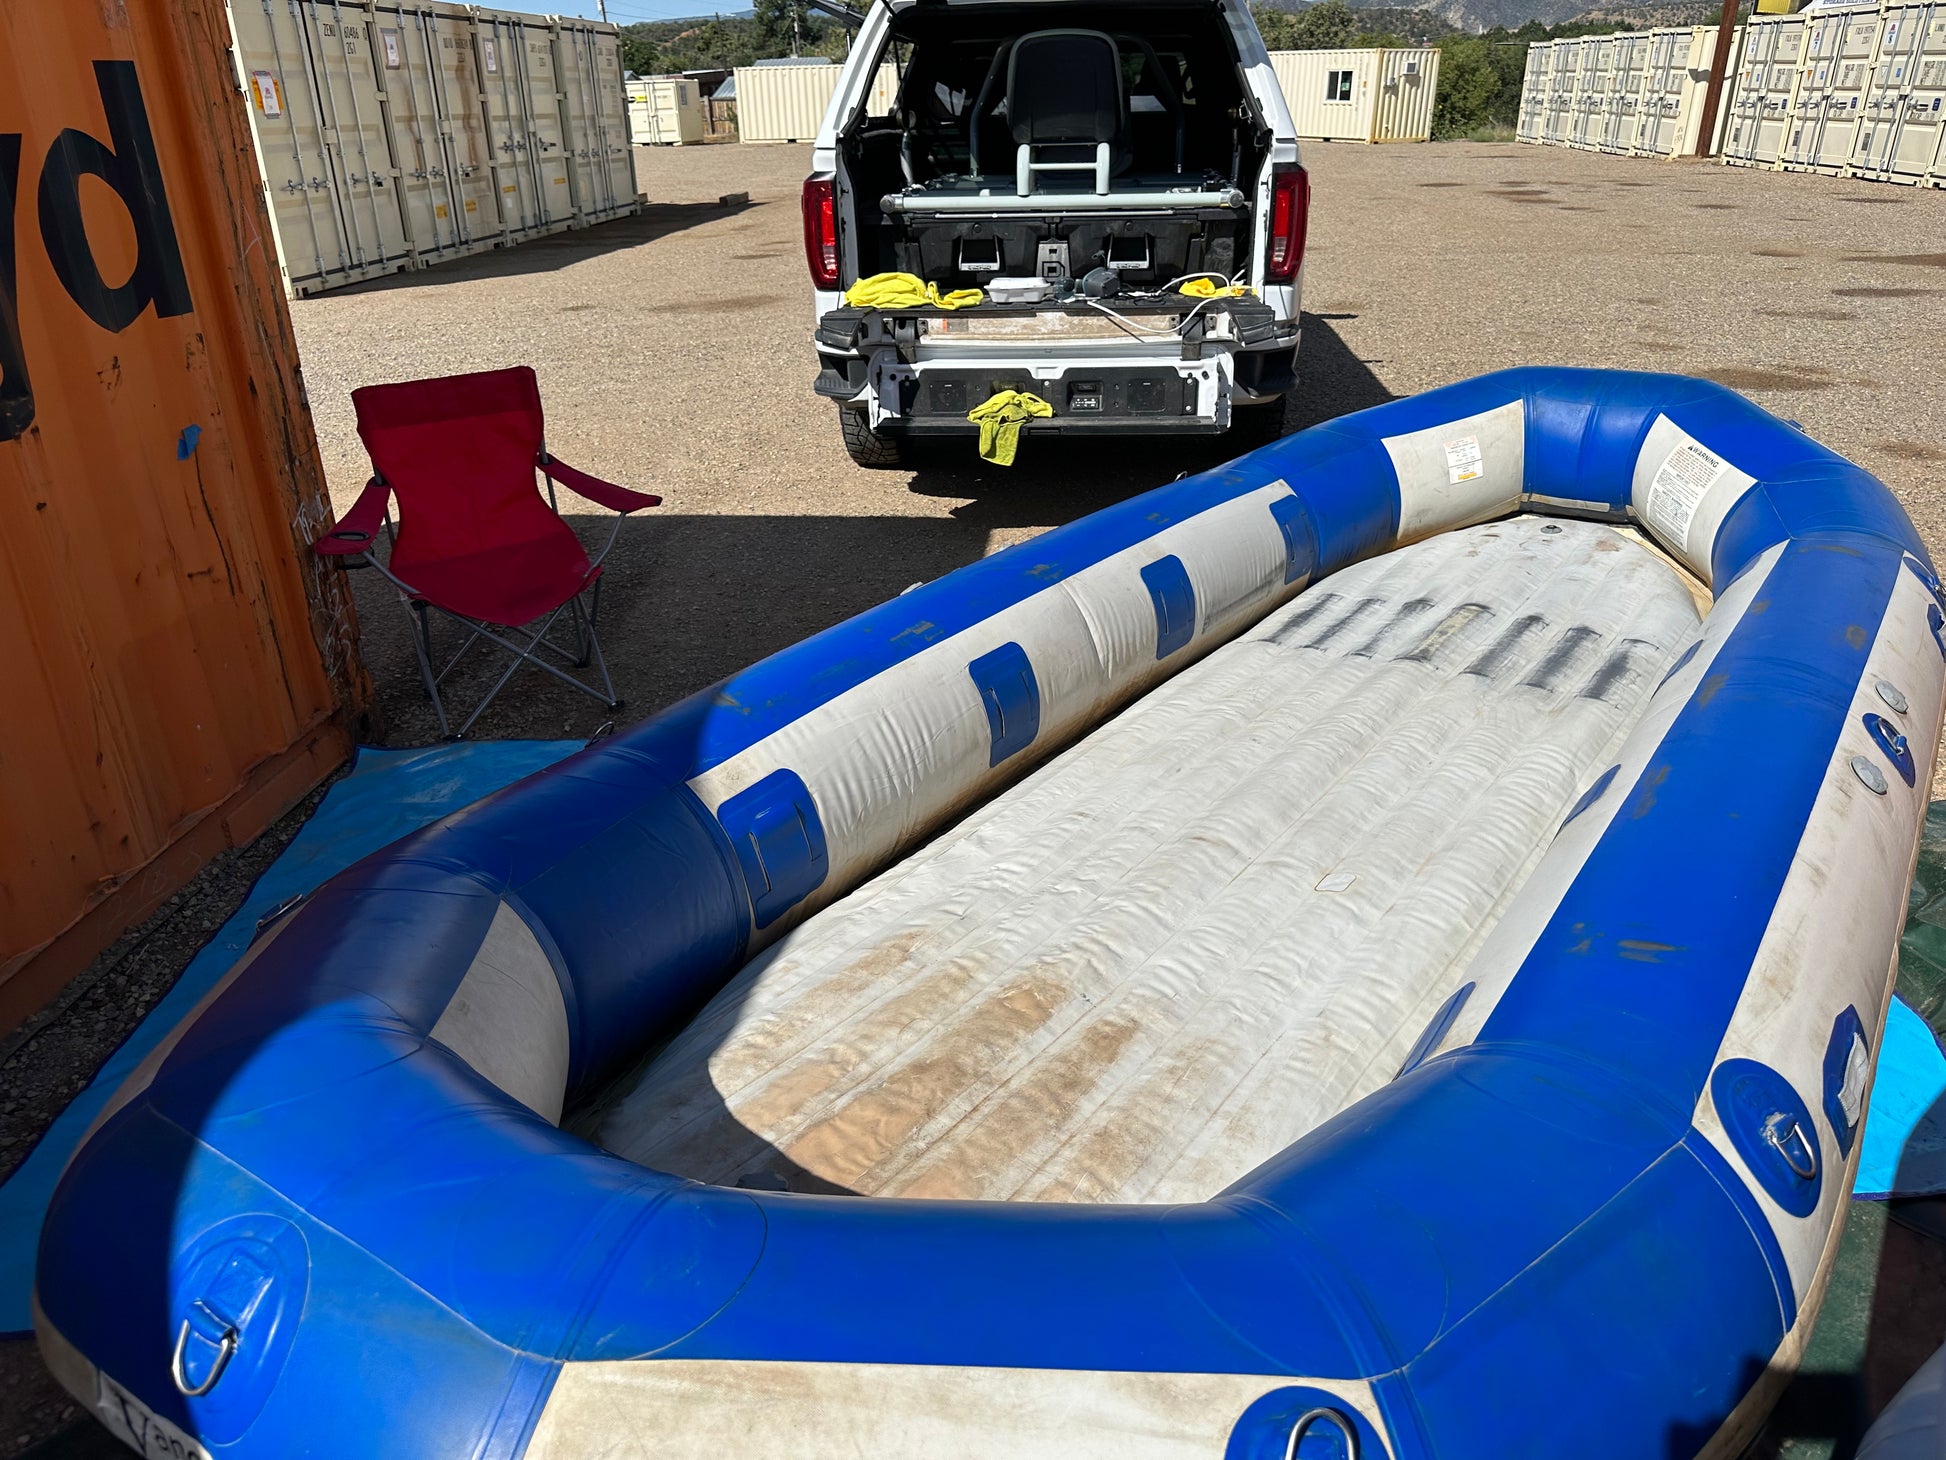 A used 2006 16' Vanguard raft in fair condition, the Used 16' Vanguard Raft from the brand 4CRS.